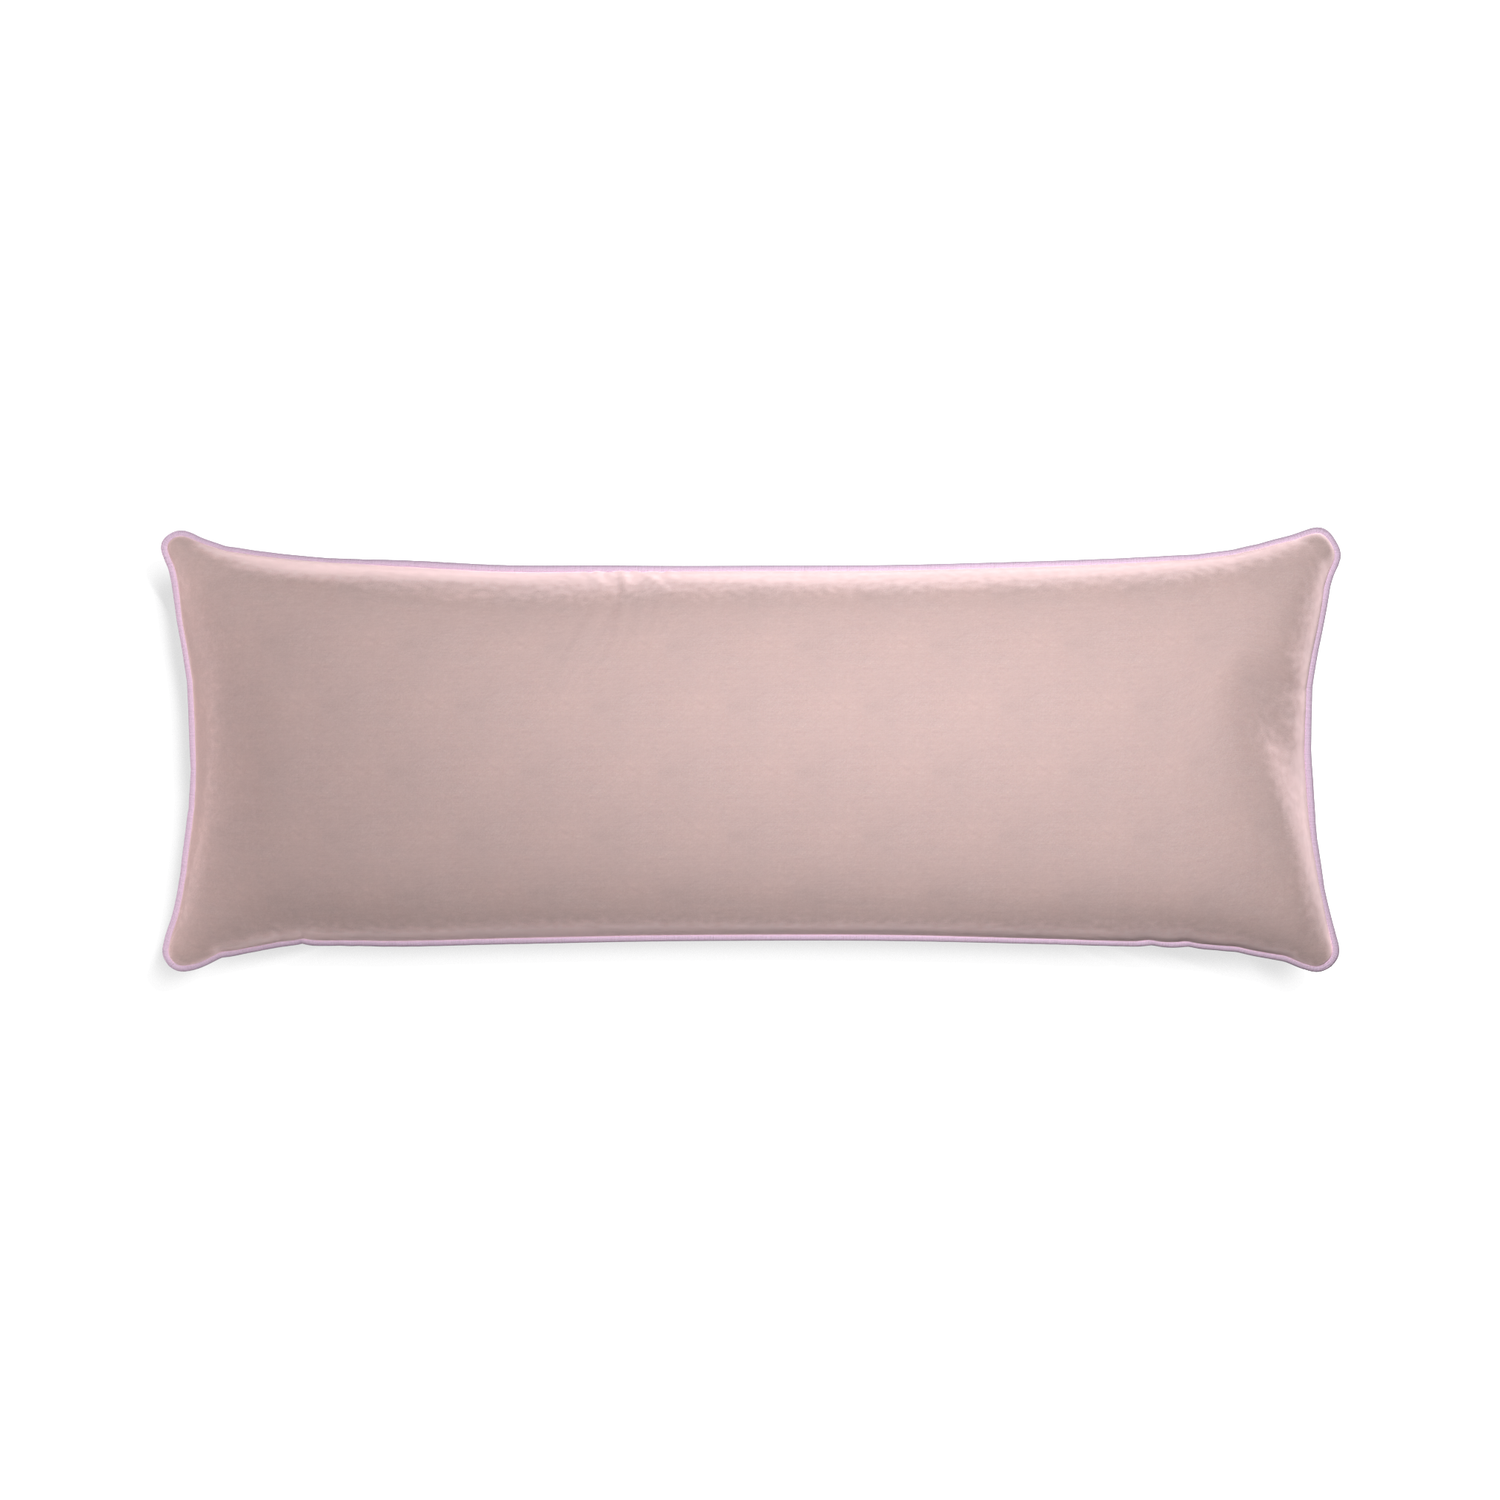 rectangle light pink velvet pillow with lilac piping